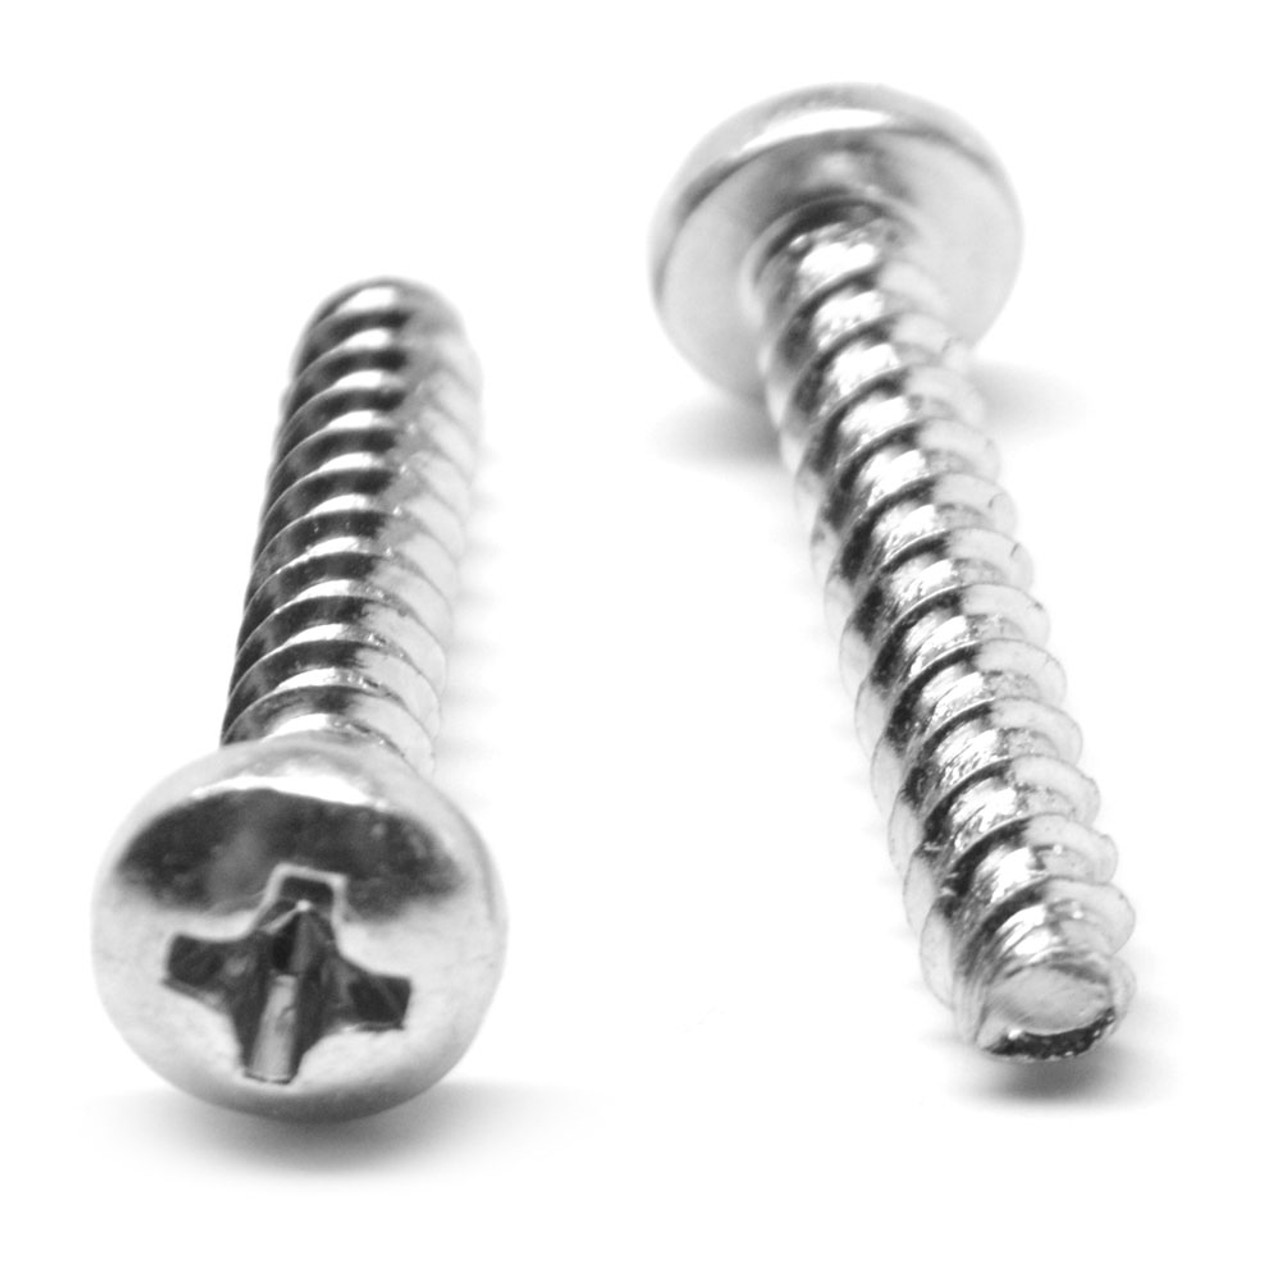 M2.2 x 0.98 x 16 MM EJOT PT-Alternative Phillips Pan Head Thread Forming Screw Stainless Steel 18-8